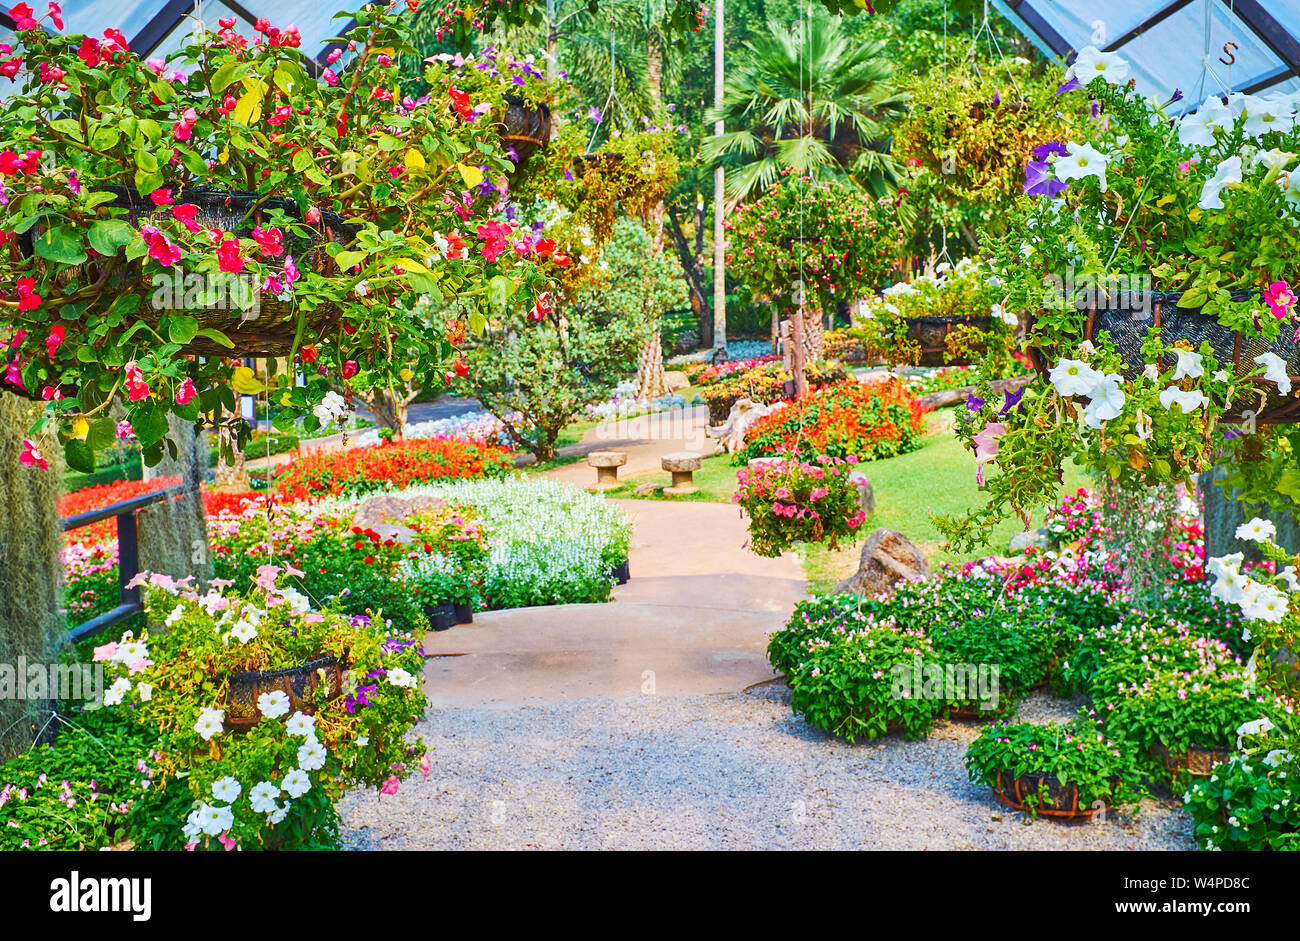 Ampelous flowers are widely spread in Mae Fah Luang garden, local gardeners grow petunia, viol, begonia, lobelia, fuchsia and others, Doi Tung, Thaila Stock Photo